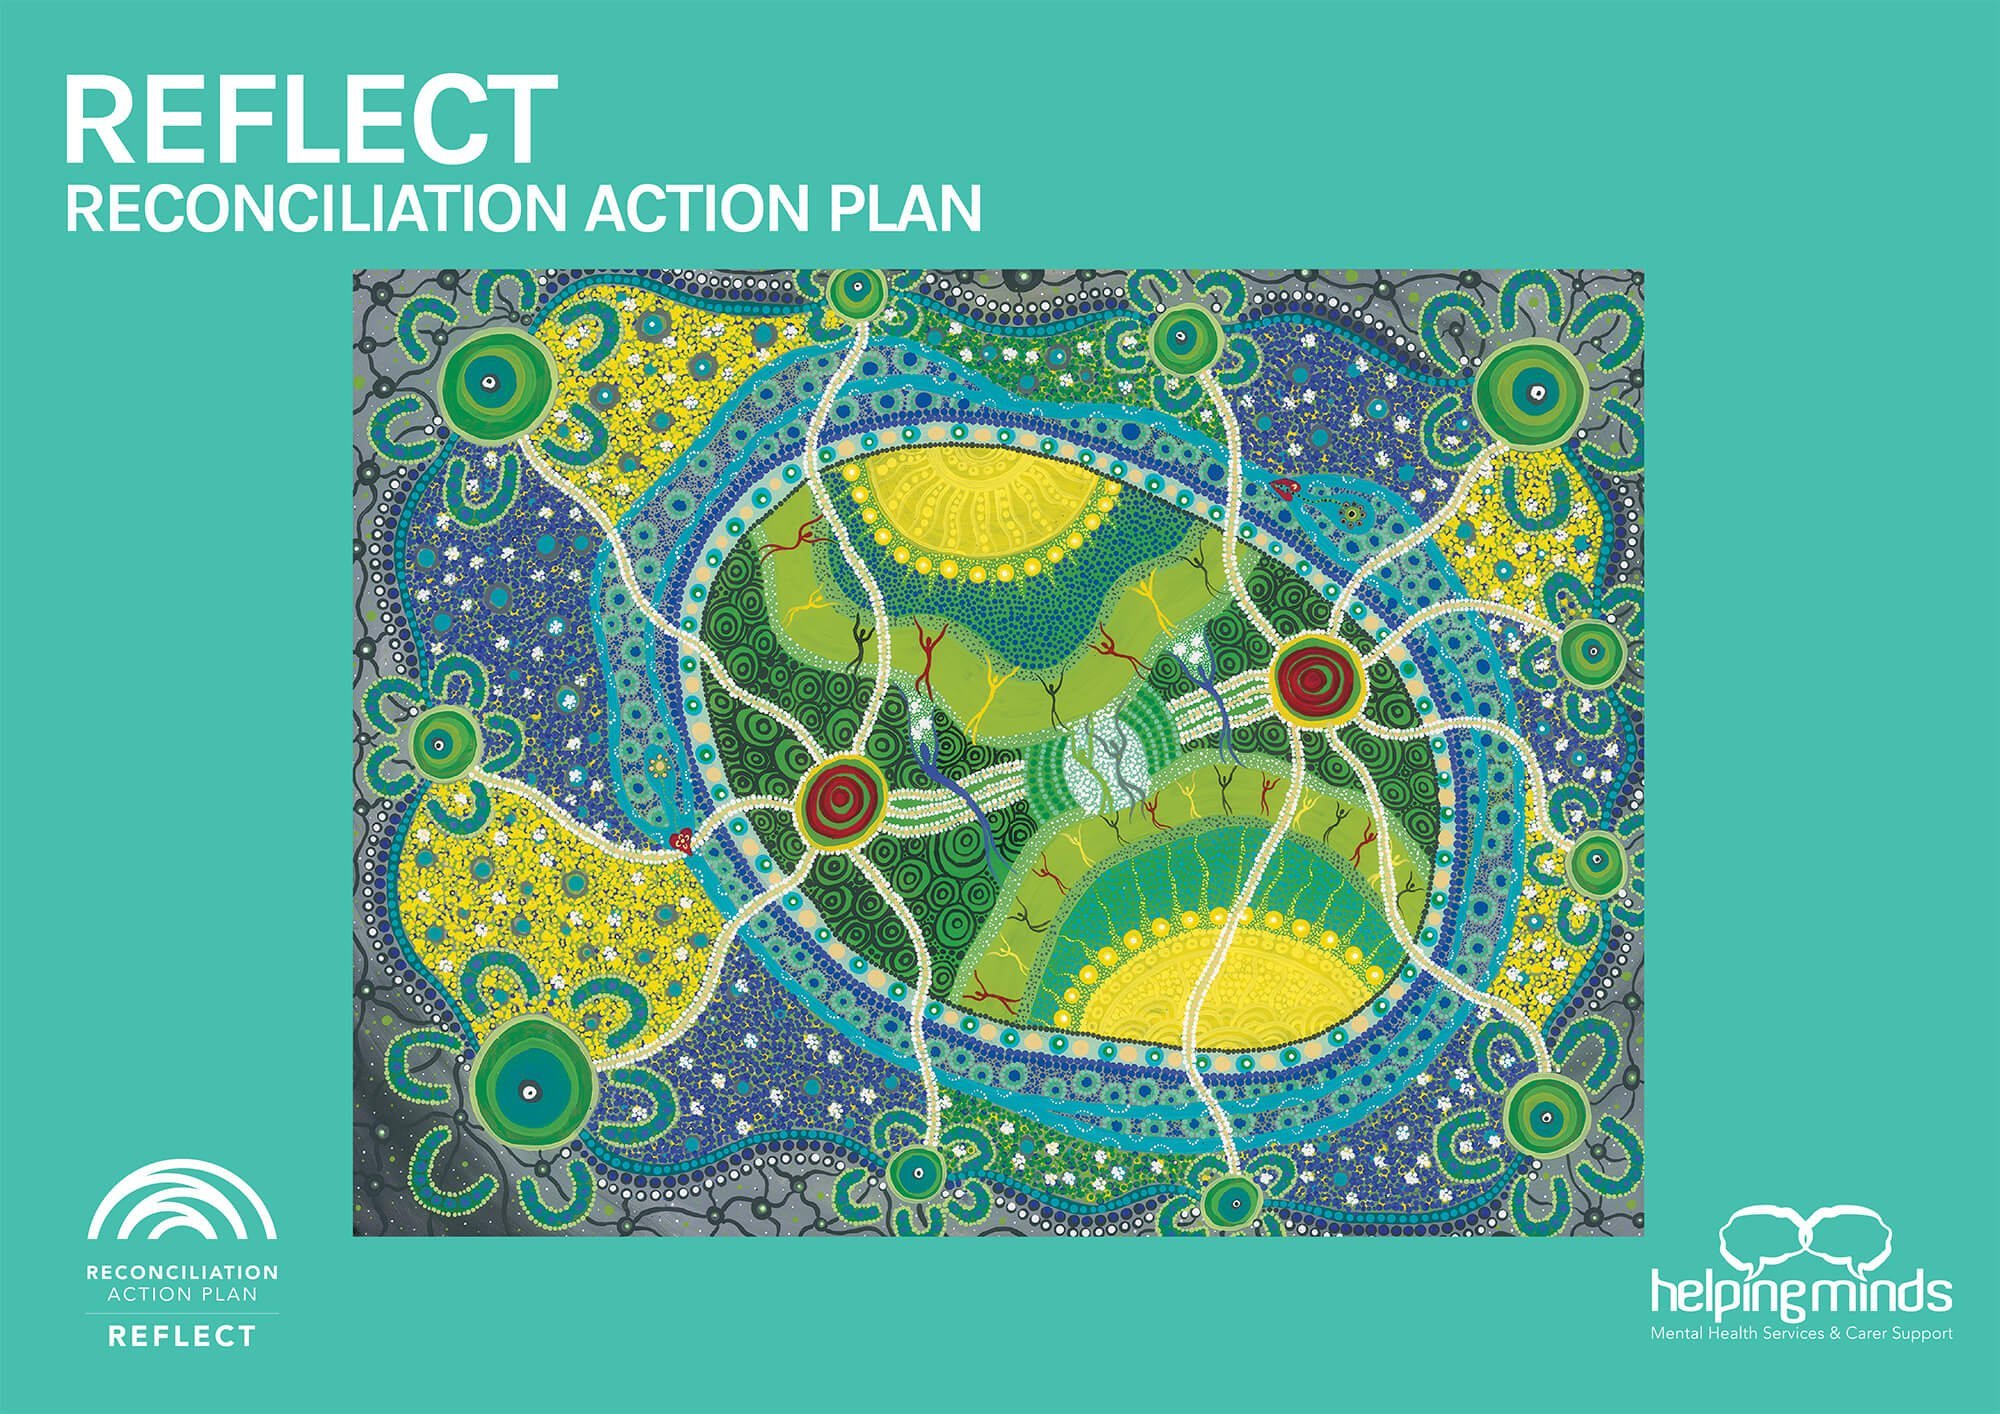 HelpingMinds® Our Reflection, Reconciliation Action Plan official artwork